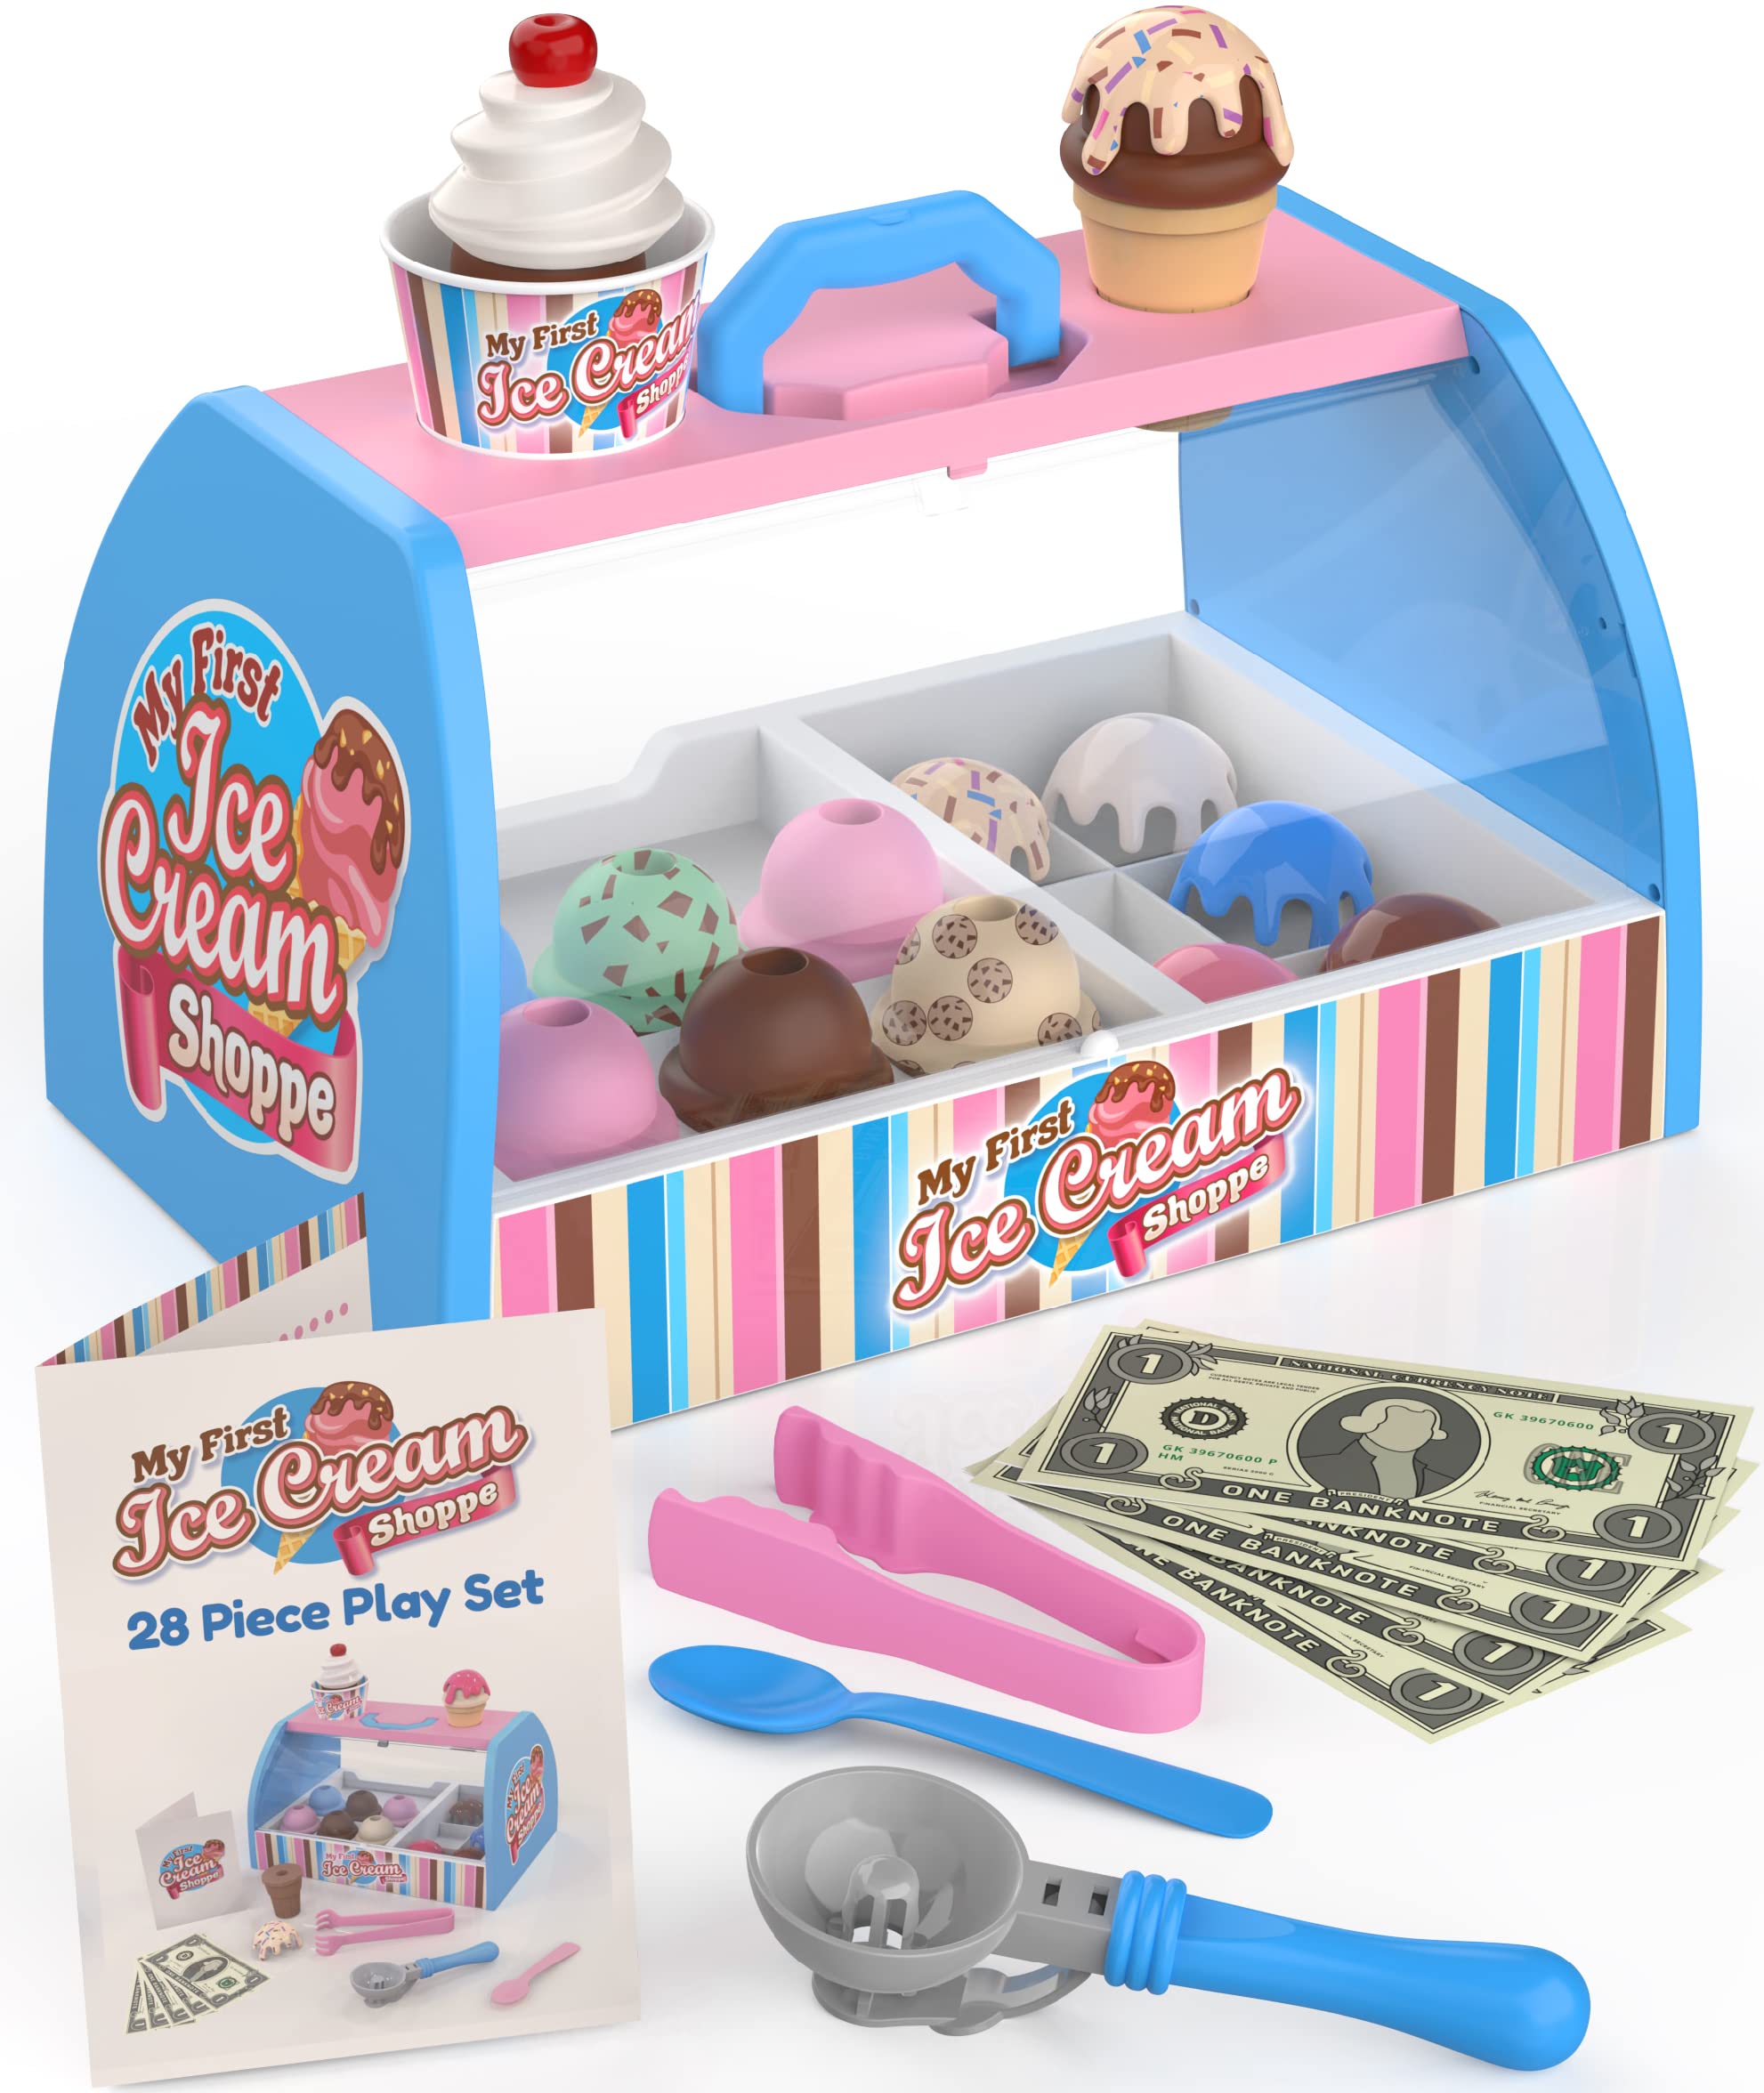 Ice Cream Counter Playset for Kids, Pretend Play (28 pcs) Best Gift for 3 4 5 6 Year Old Girl or Boy, Play Food Scoop and Serve, Toddler Toy